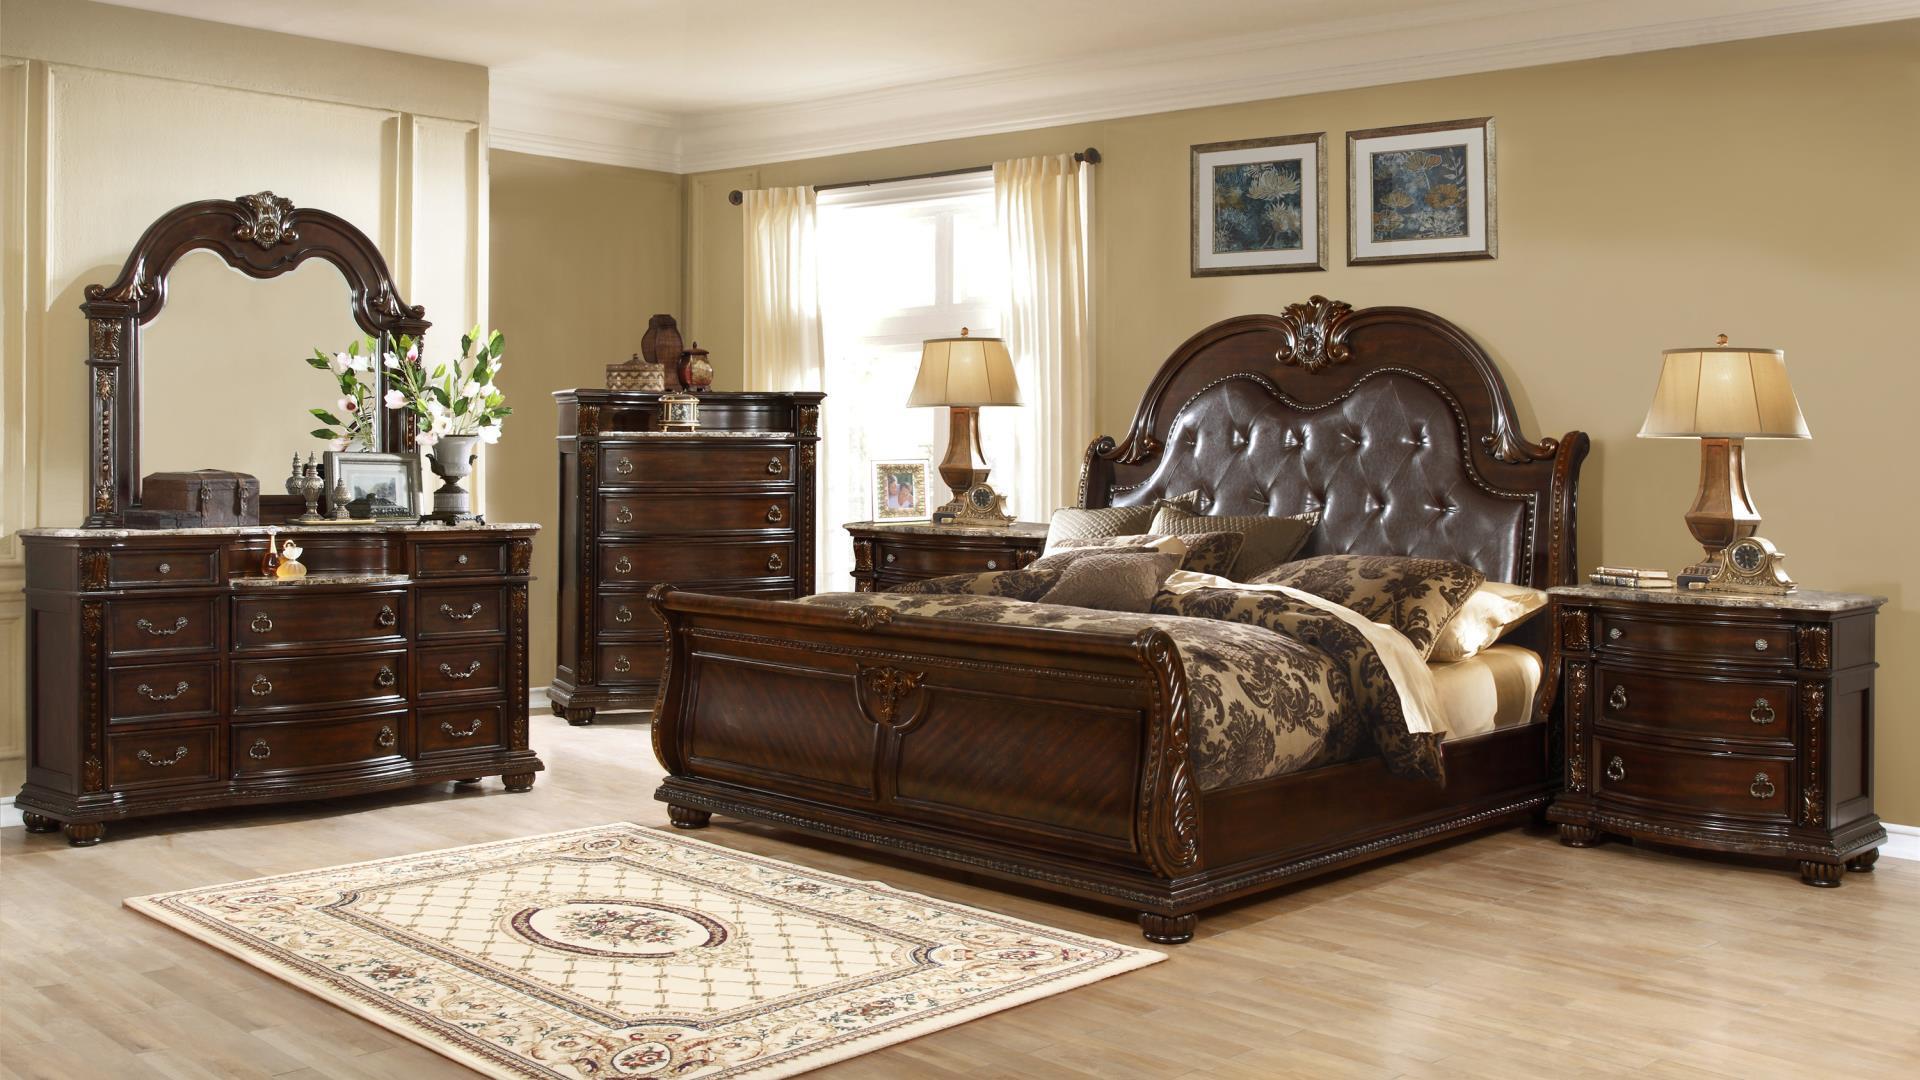 Classic, Traditional Sleigh Bedroom Set ROMA ROMA-Q-Set-5 in Dark Walnut Bonded Leather